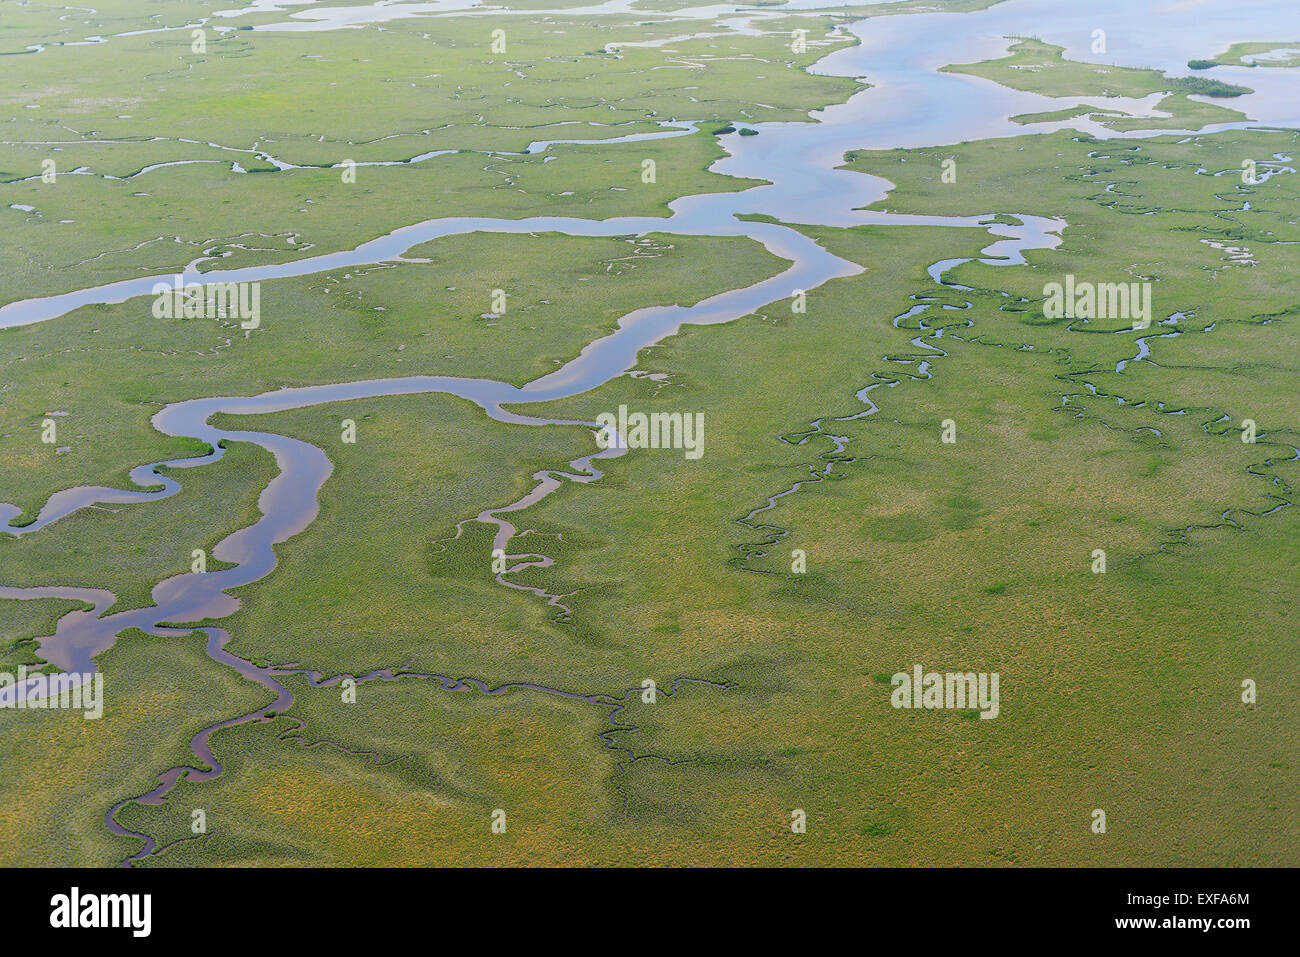 Aerial view of marshes and mangrove forest at Sian Ka'an natural reserve, Quintana Roo, Mexico Stock Photo